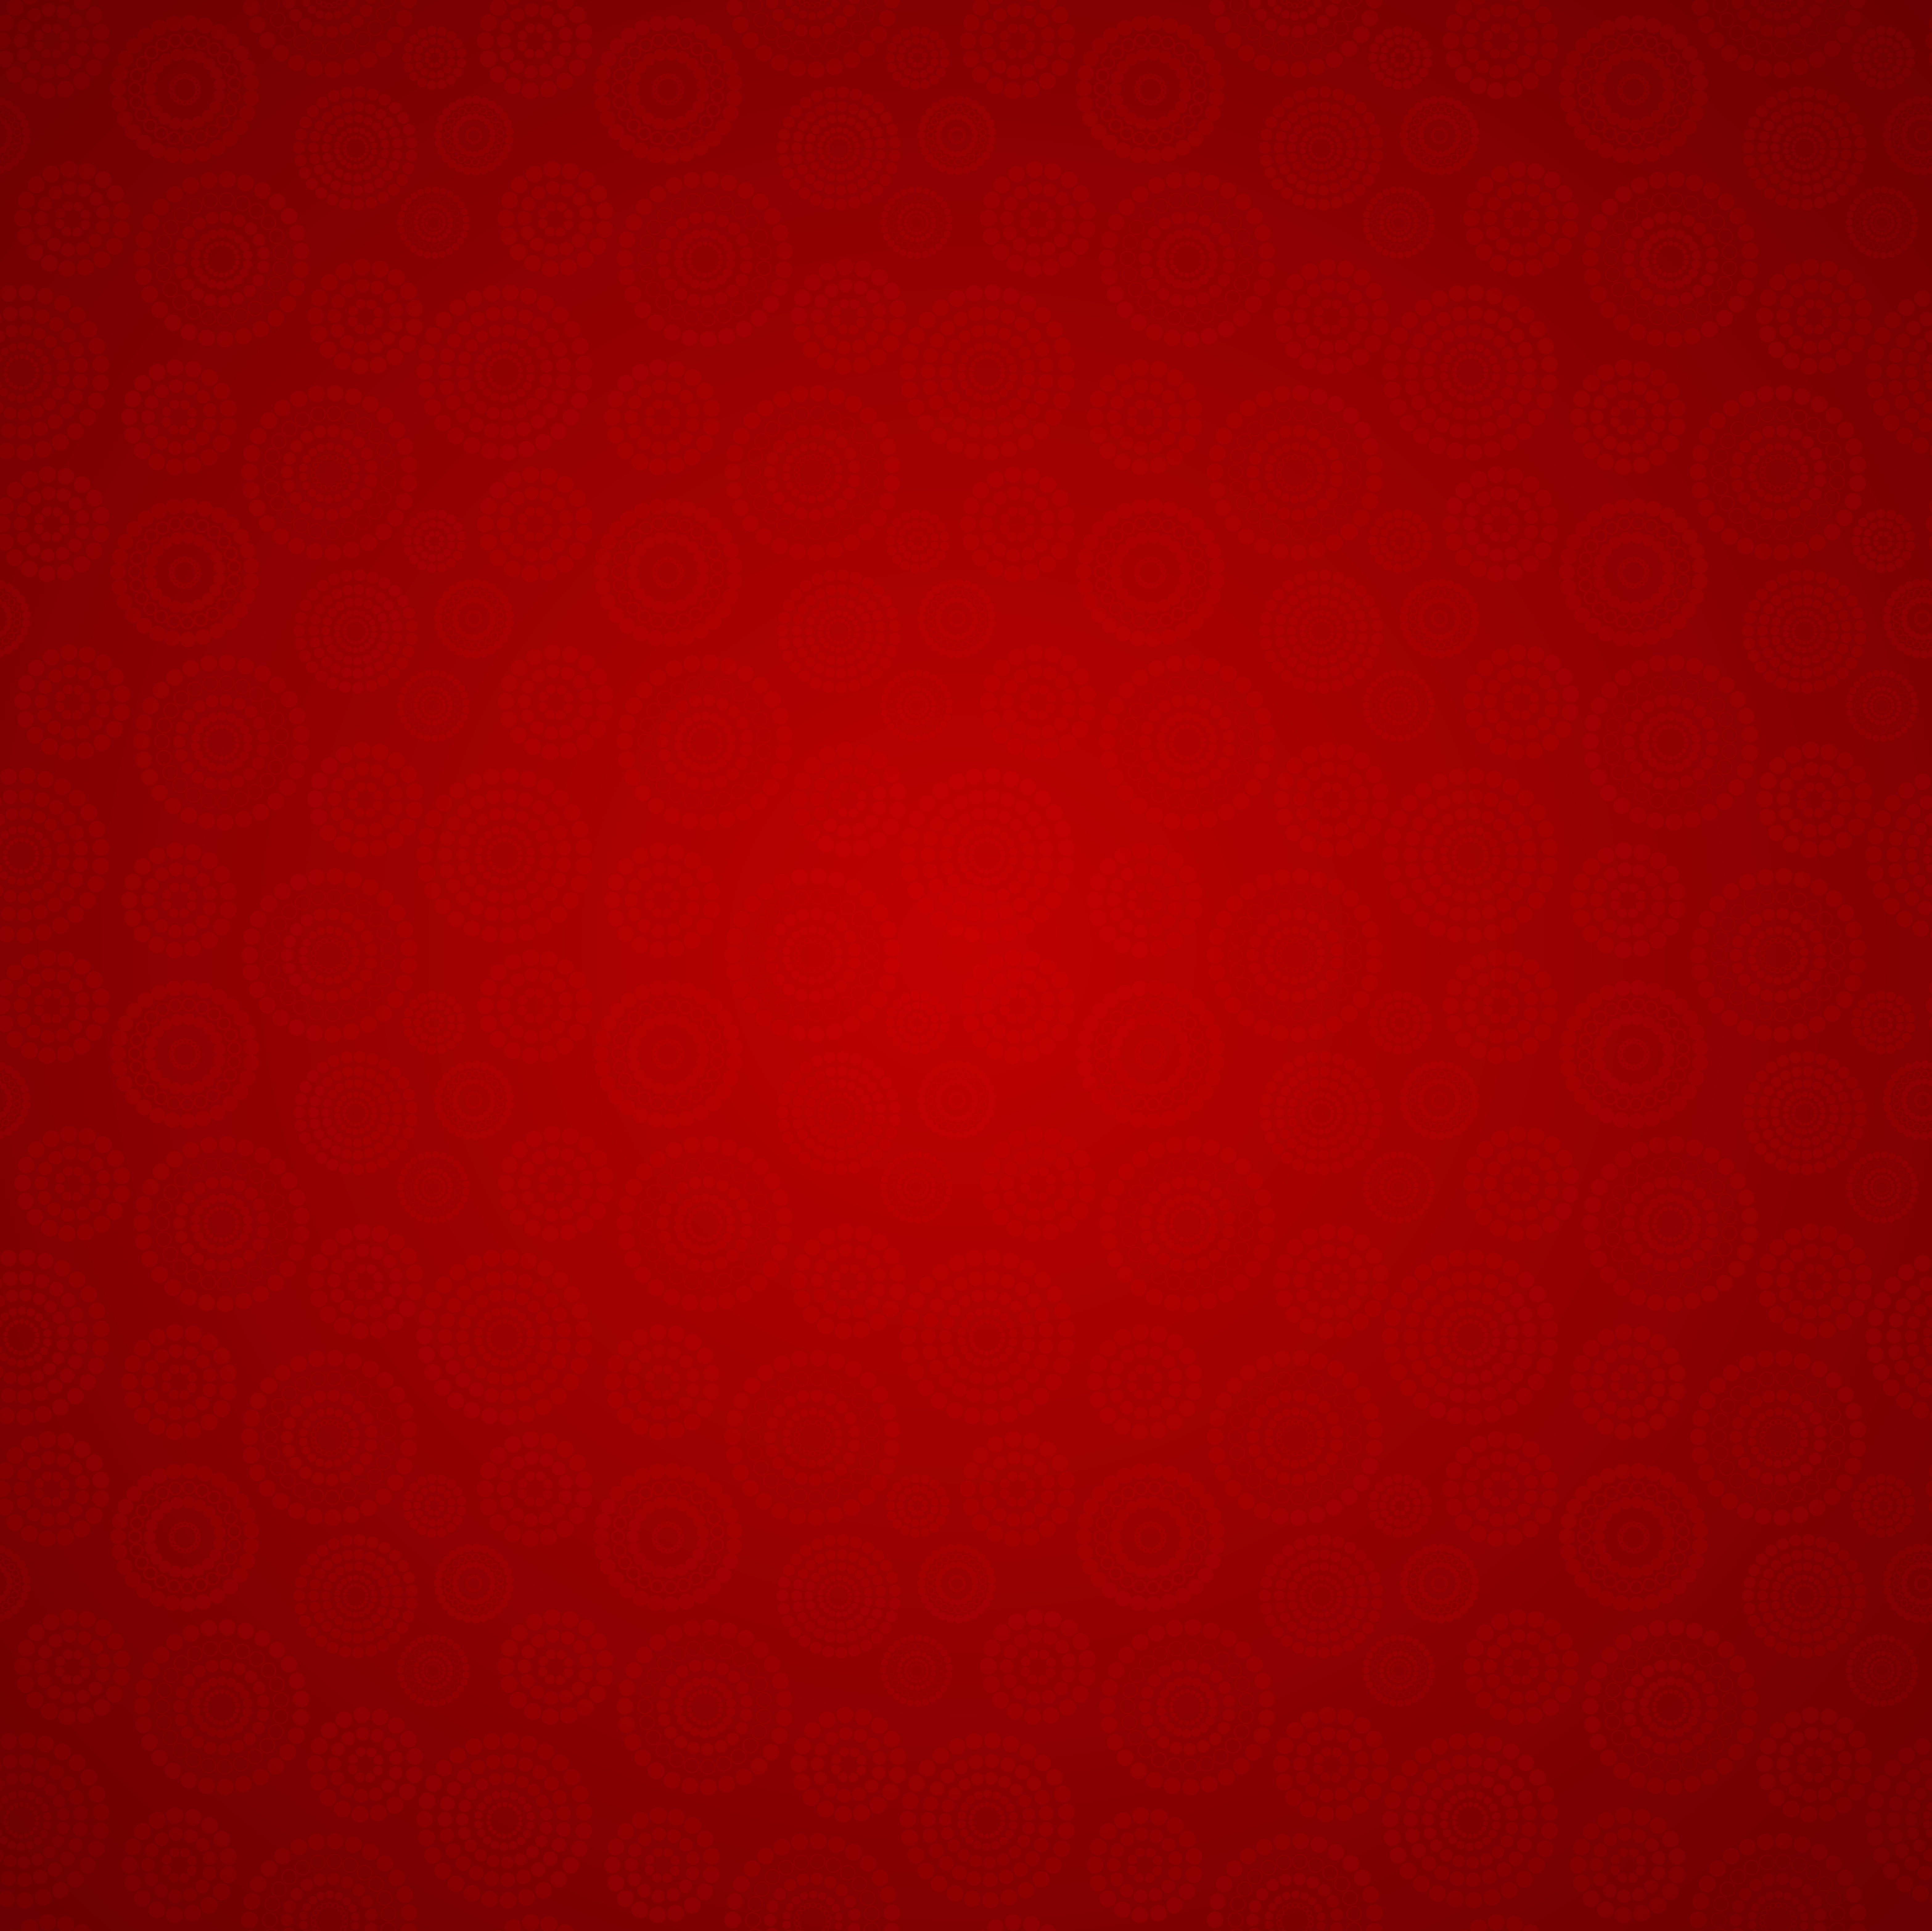 Ornamental Red Background Gallery Yopriceville High